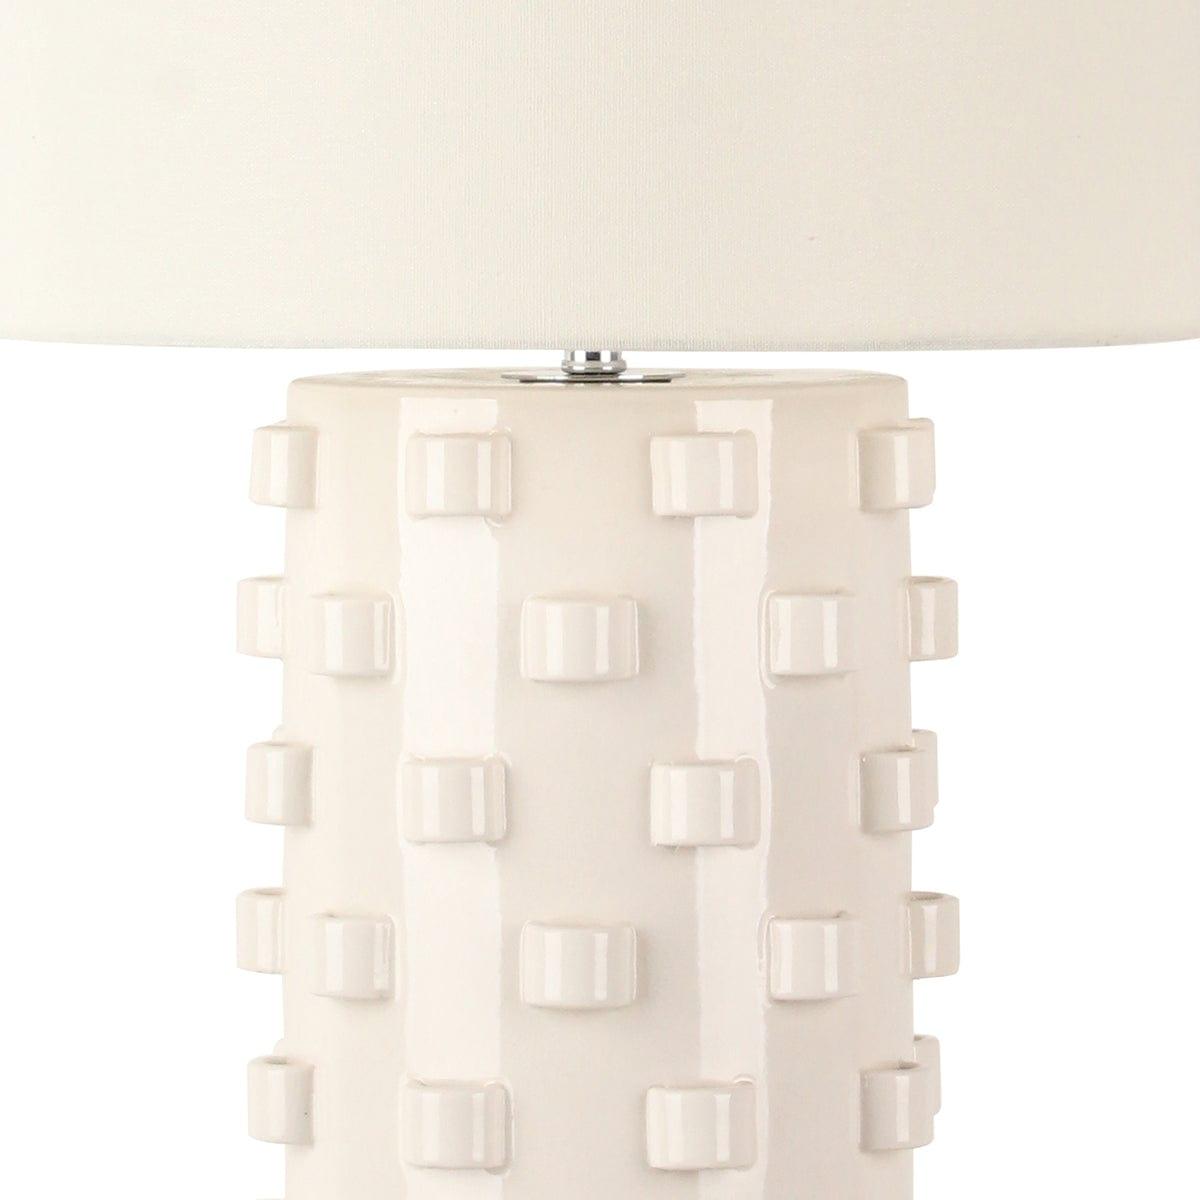 Smith Table Lamp.